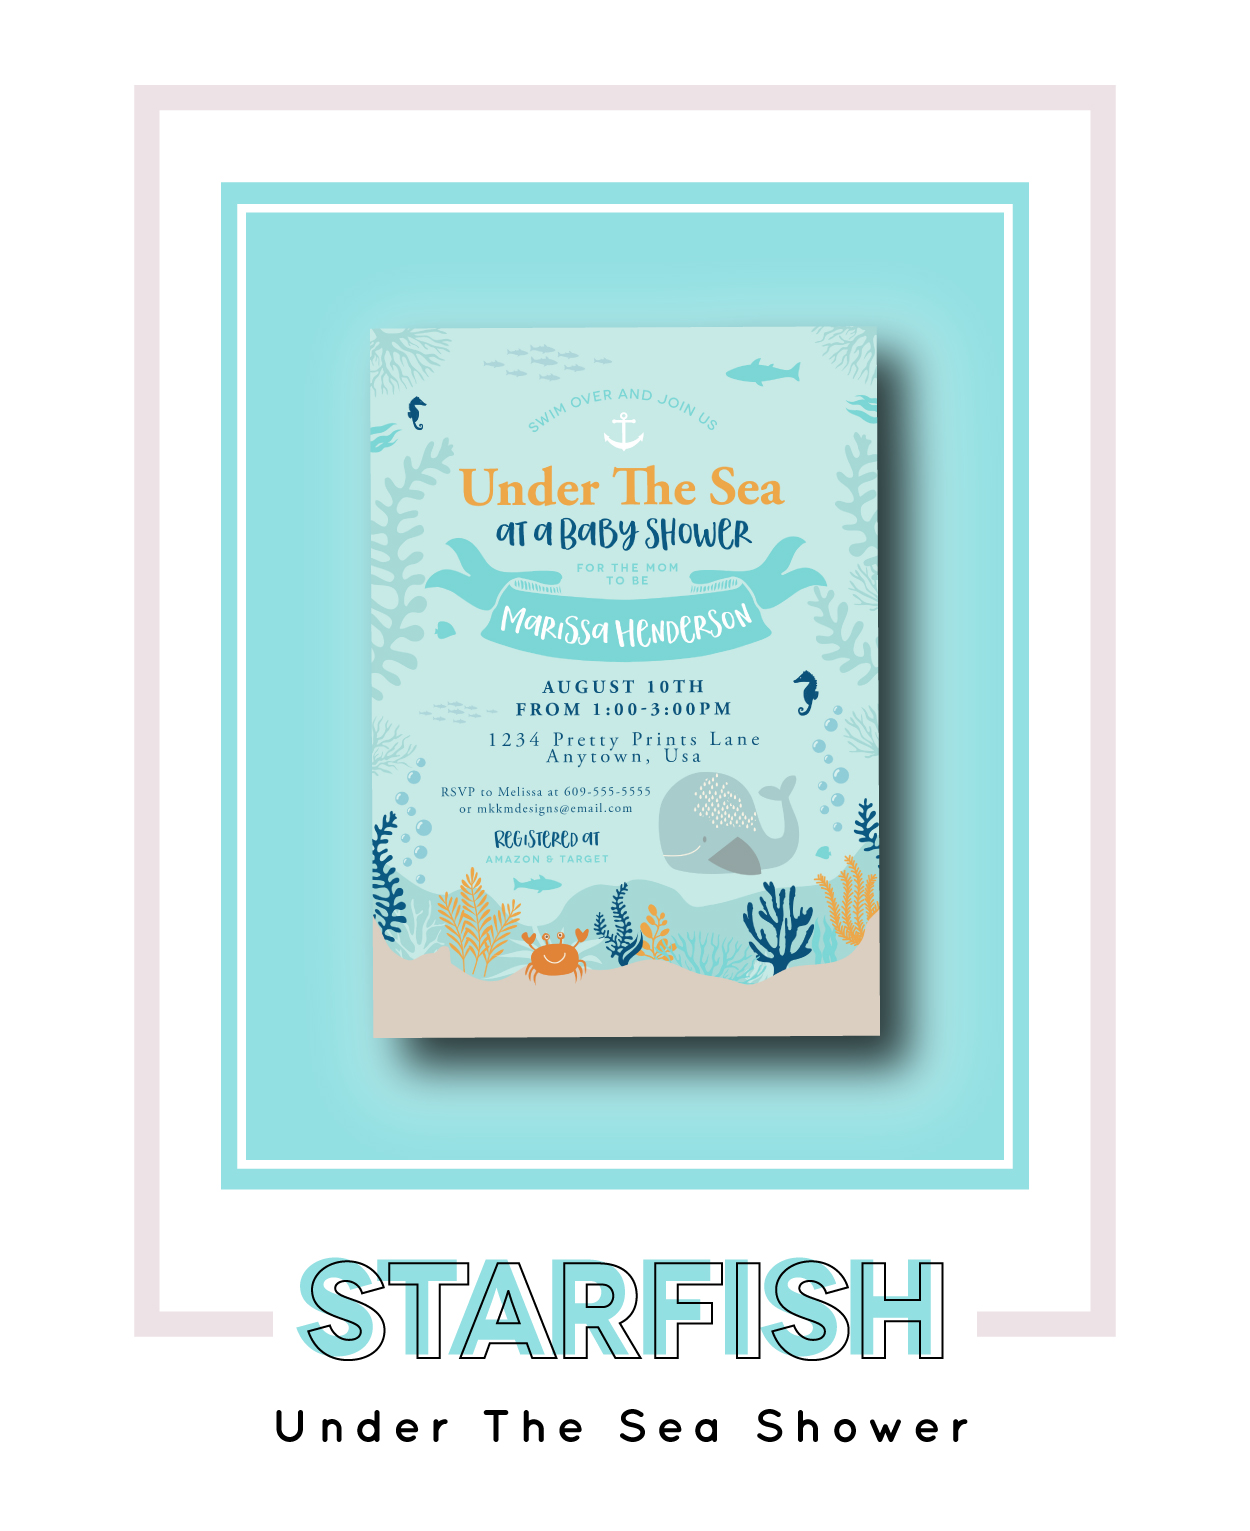 Starfish - An Under the Sea themed baby shower from Merry + Grace Design Co